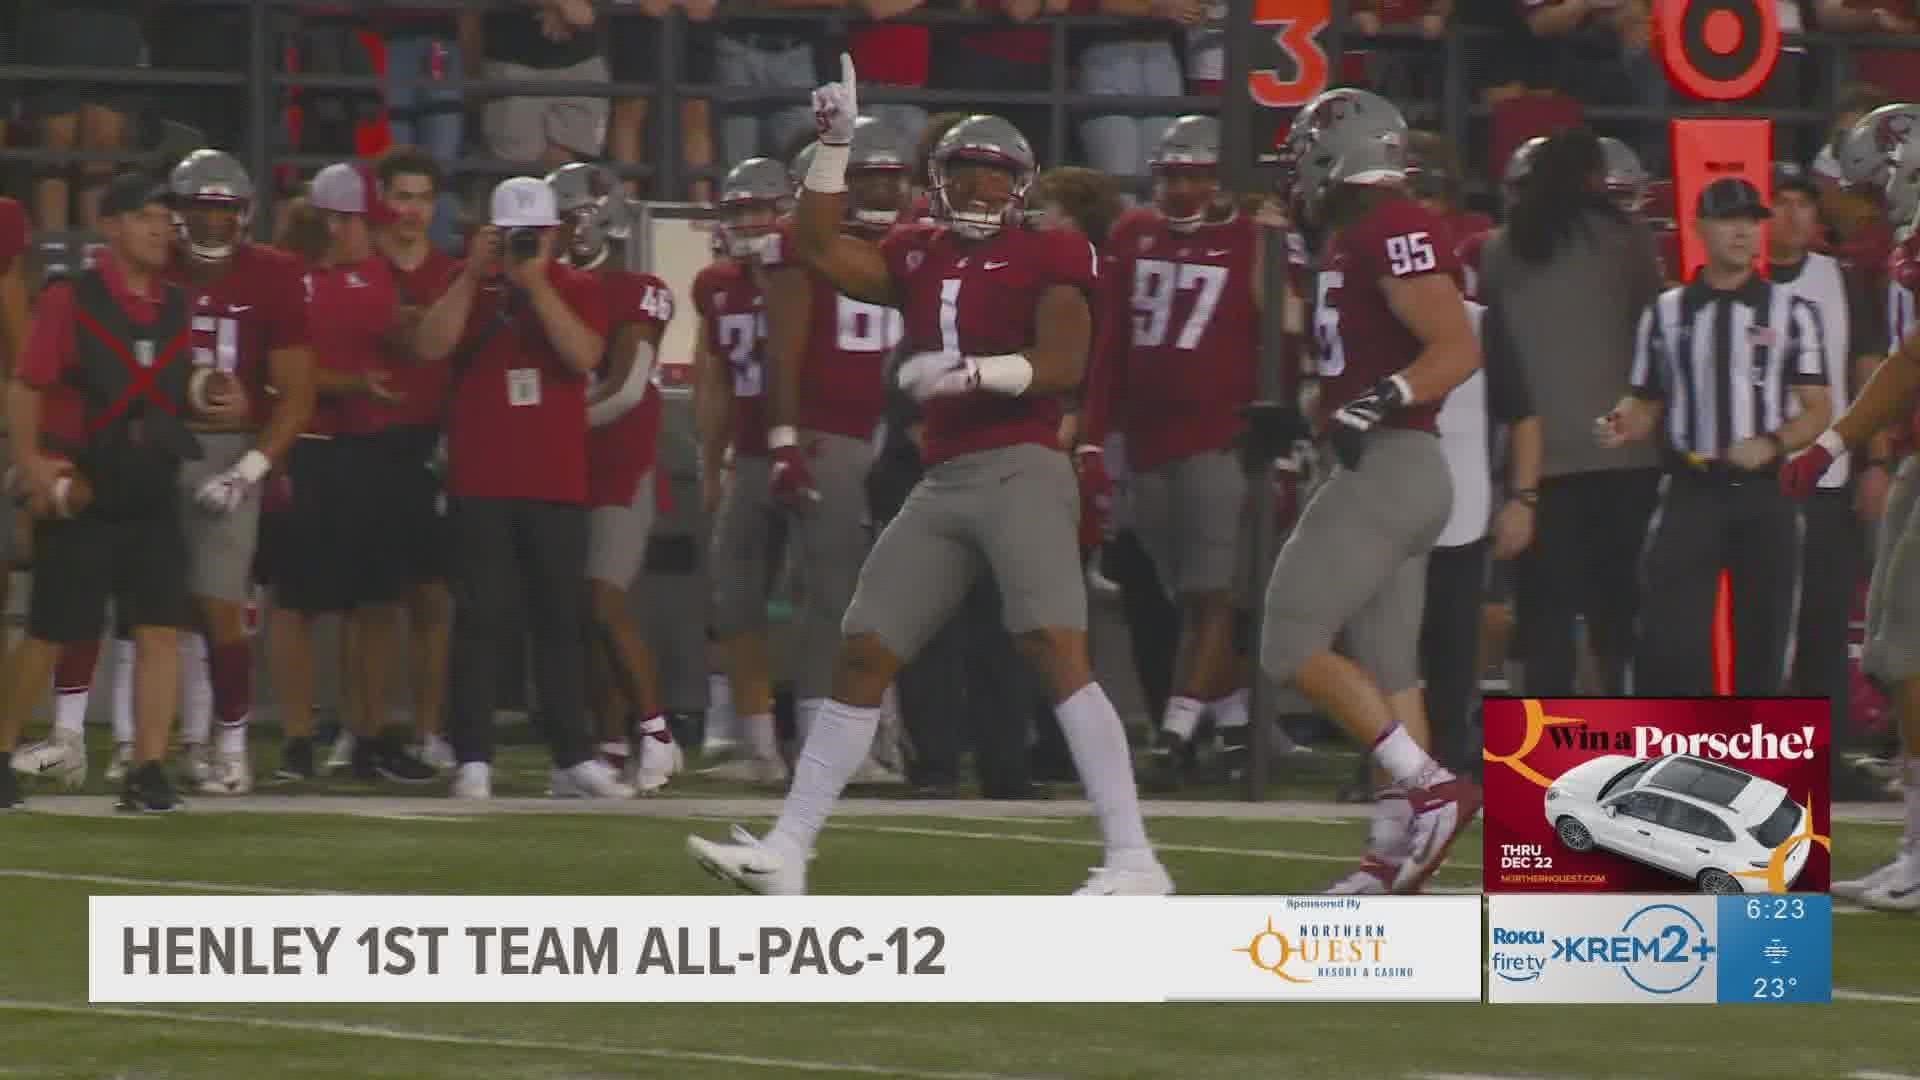 Ten Washington State football players earned All-Pac-12 accolades including Daiyan Henely who earned first team honors.